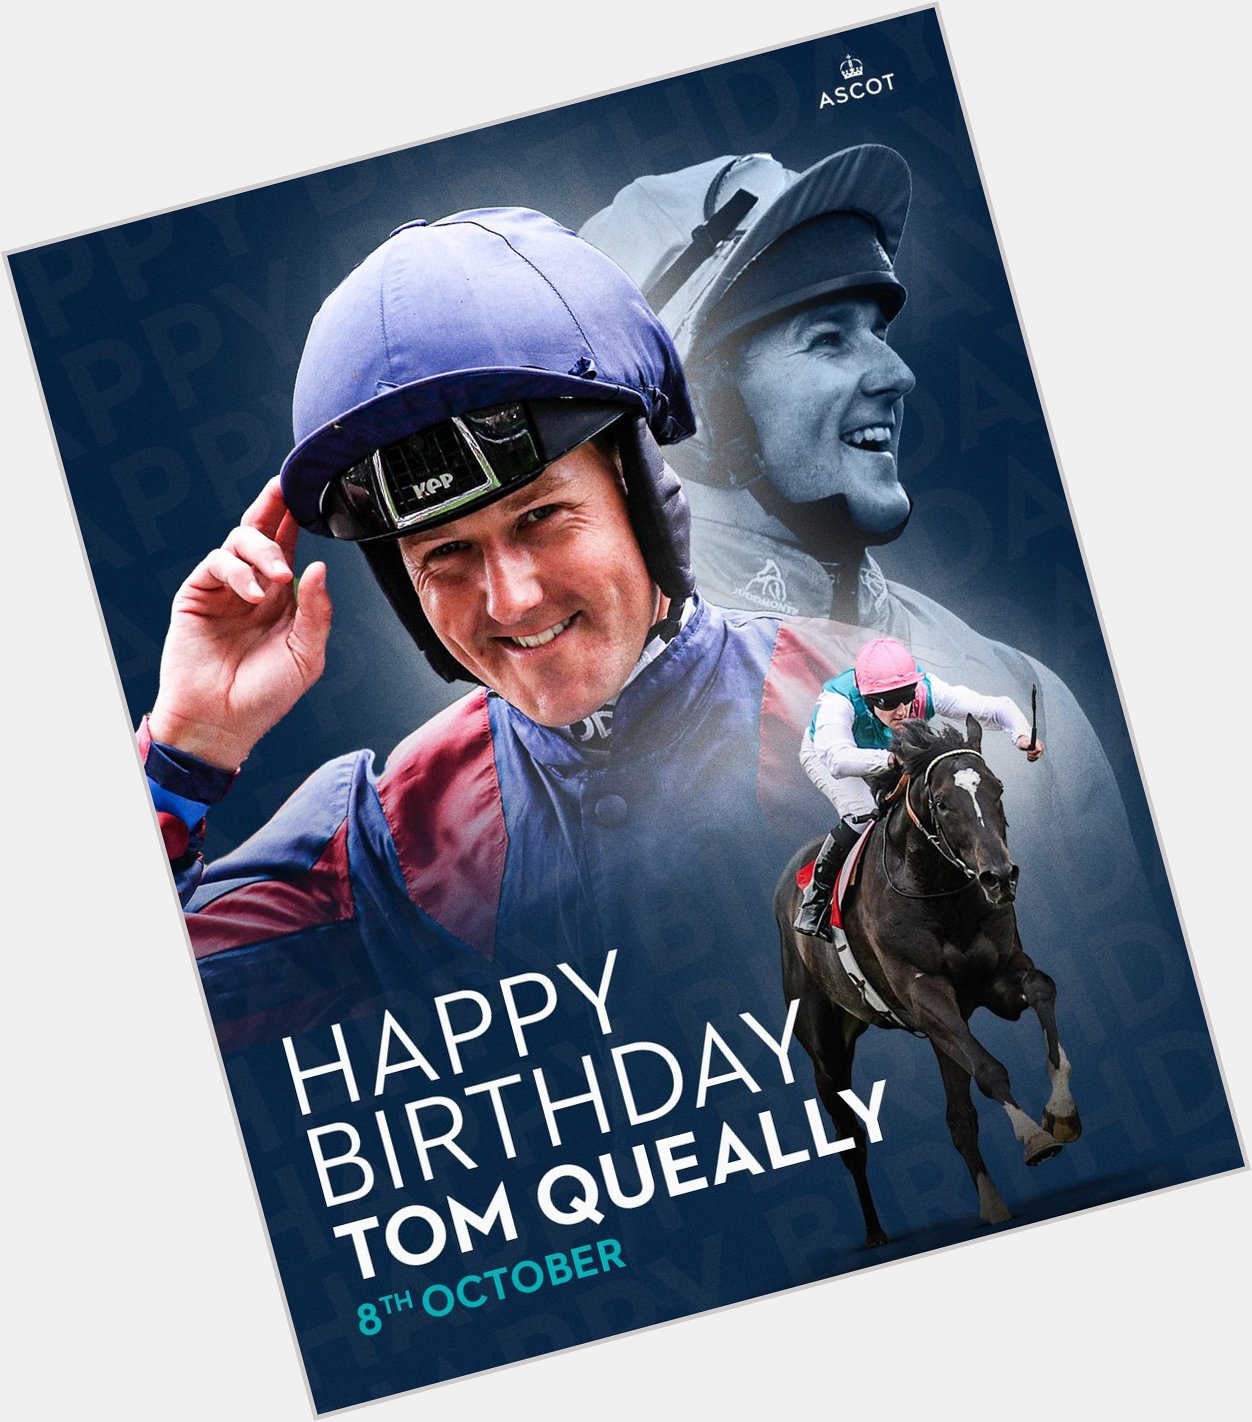 Happy Birthday to Tom Queally! Hope you have a great day! 